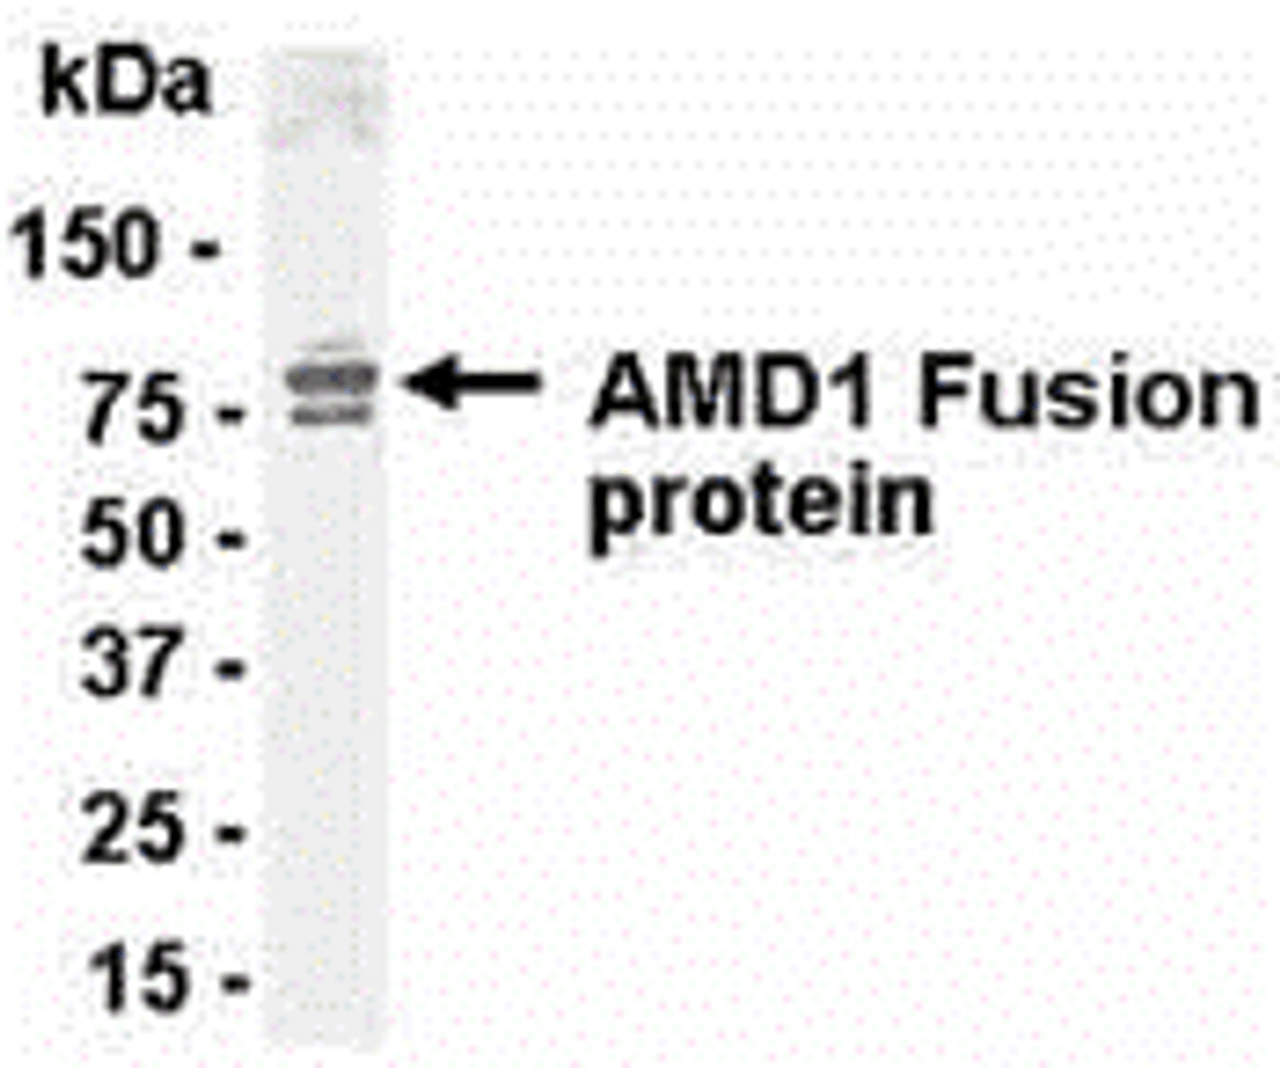 Direct Elisa Test. Protein as test antigen. Affi-pure IgY as primary antibody and Goat anti-IgY HRP as 2nd antibody. Fixed amount of antigen (5 ug/mL) and serial dilutions of antibody.